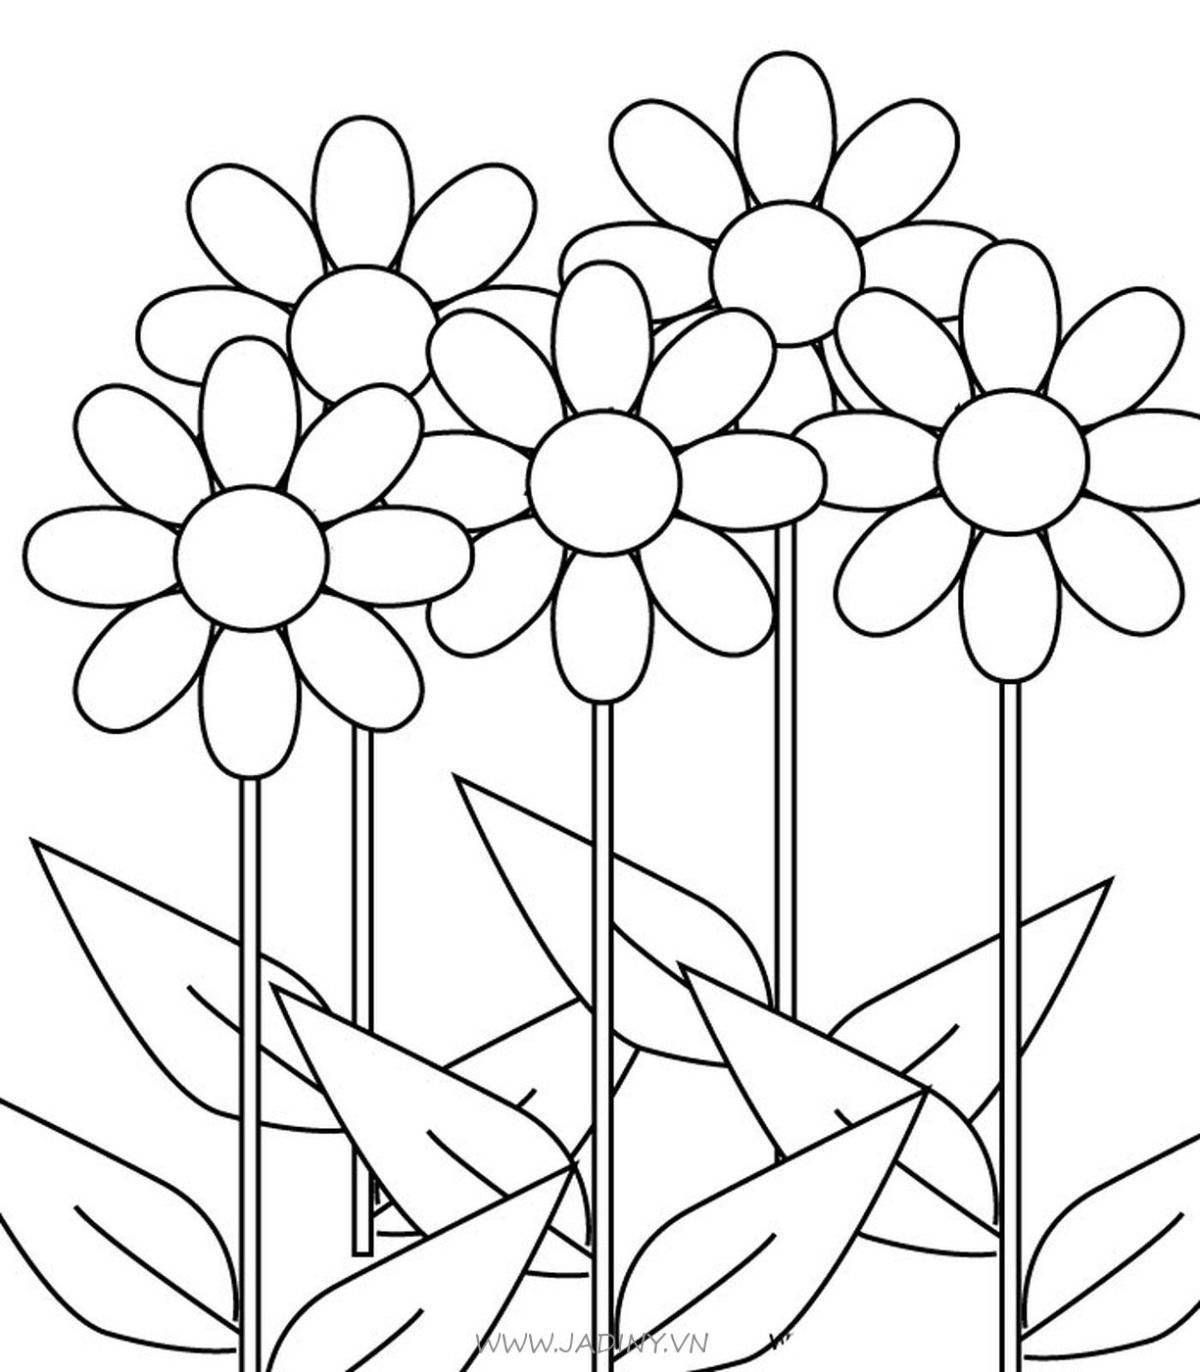 Blissful daisy coloring for kids